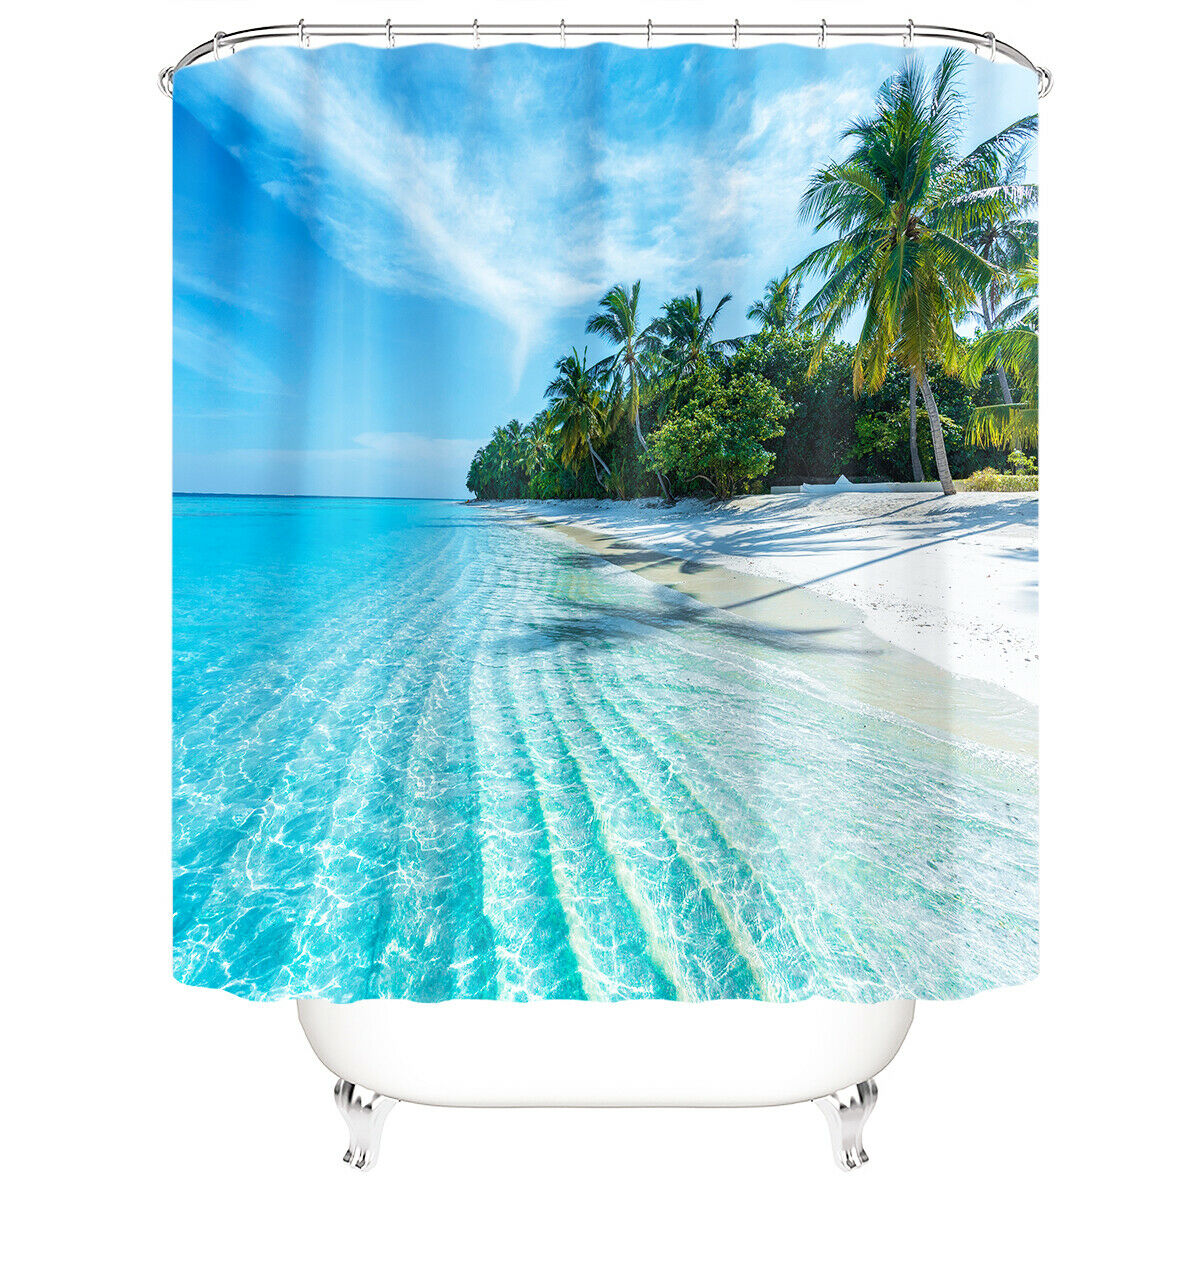 Beachside Shower Curtain Bathroom Rug Set Bath Mat Non-Slip Toilet Lid Cover-180×180cm Shower Curtain Only-Free Shipping at meselling99